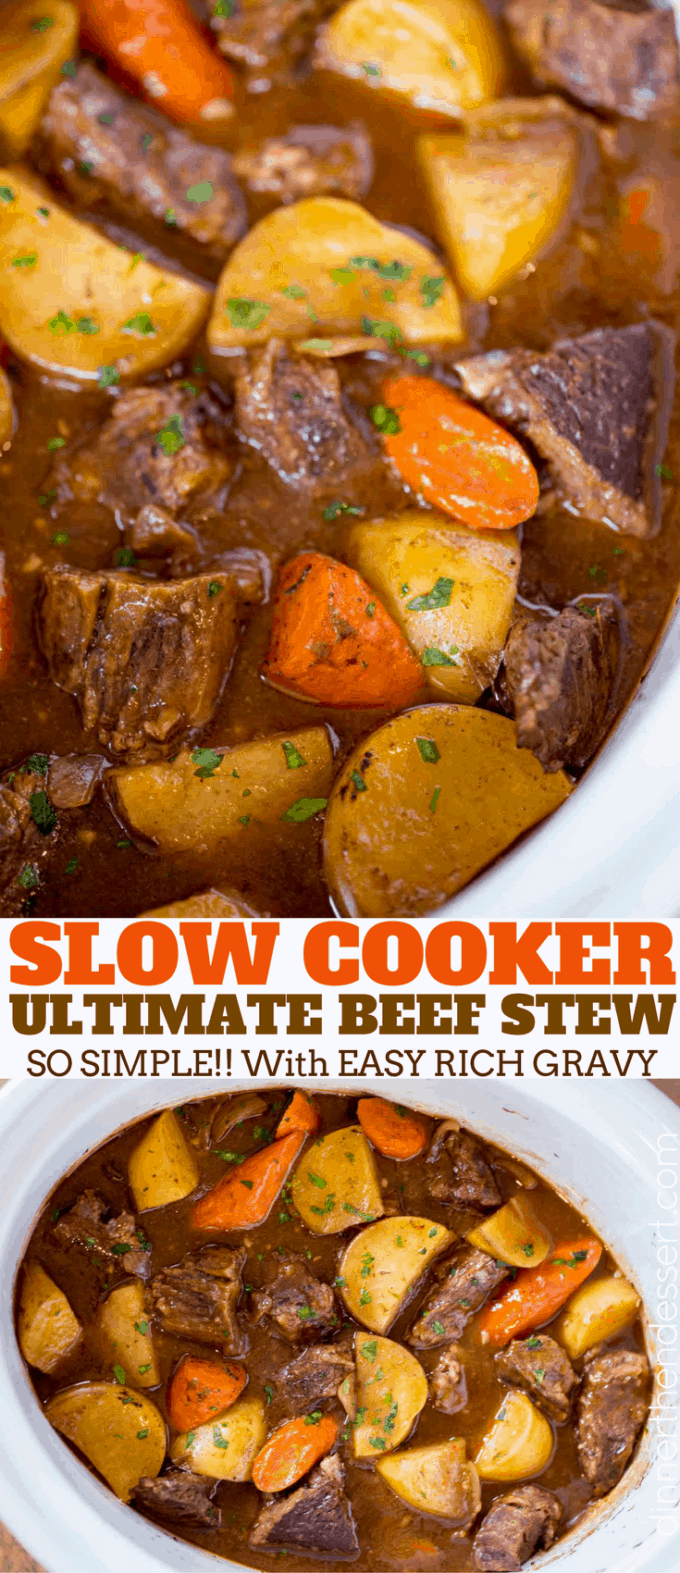 Slow Cooker Beef Stew Collage